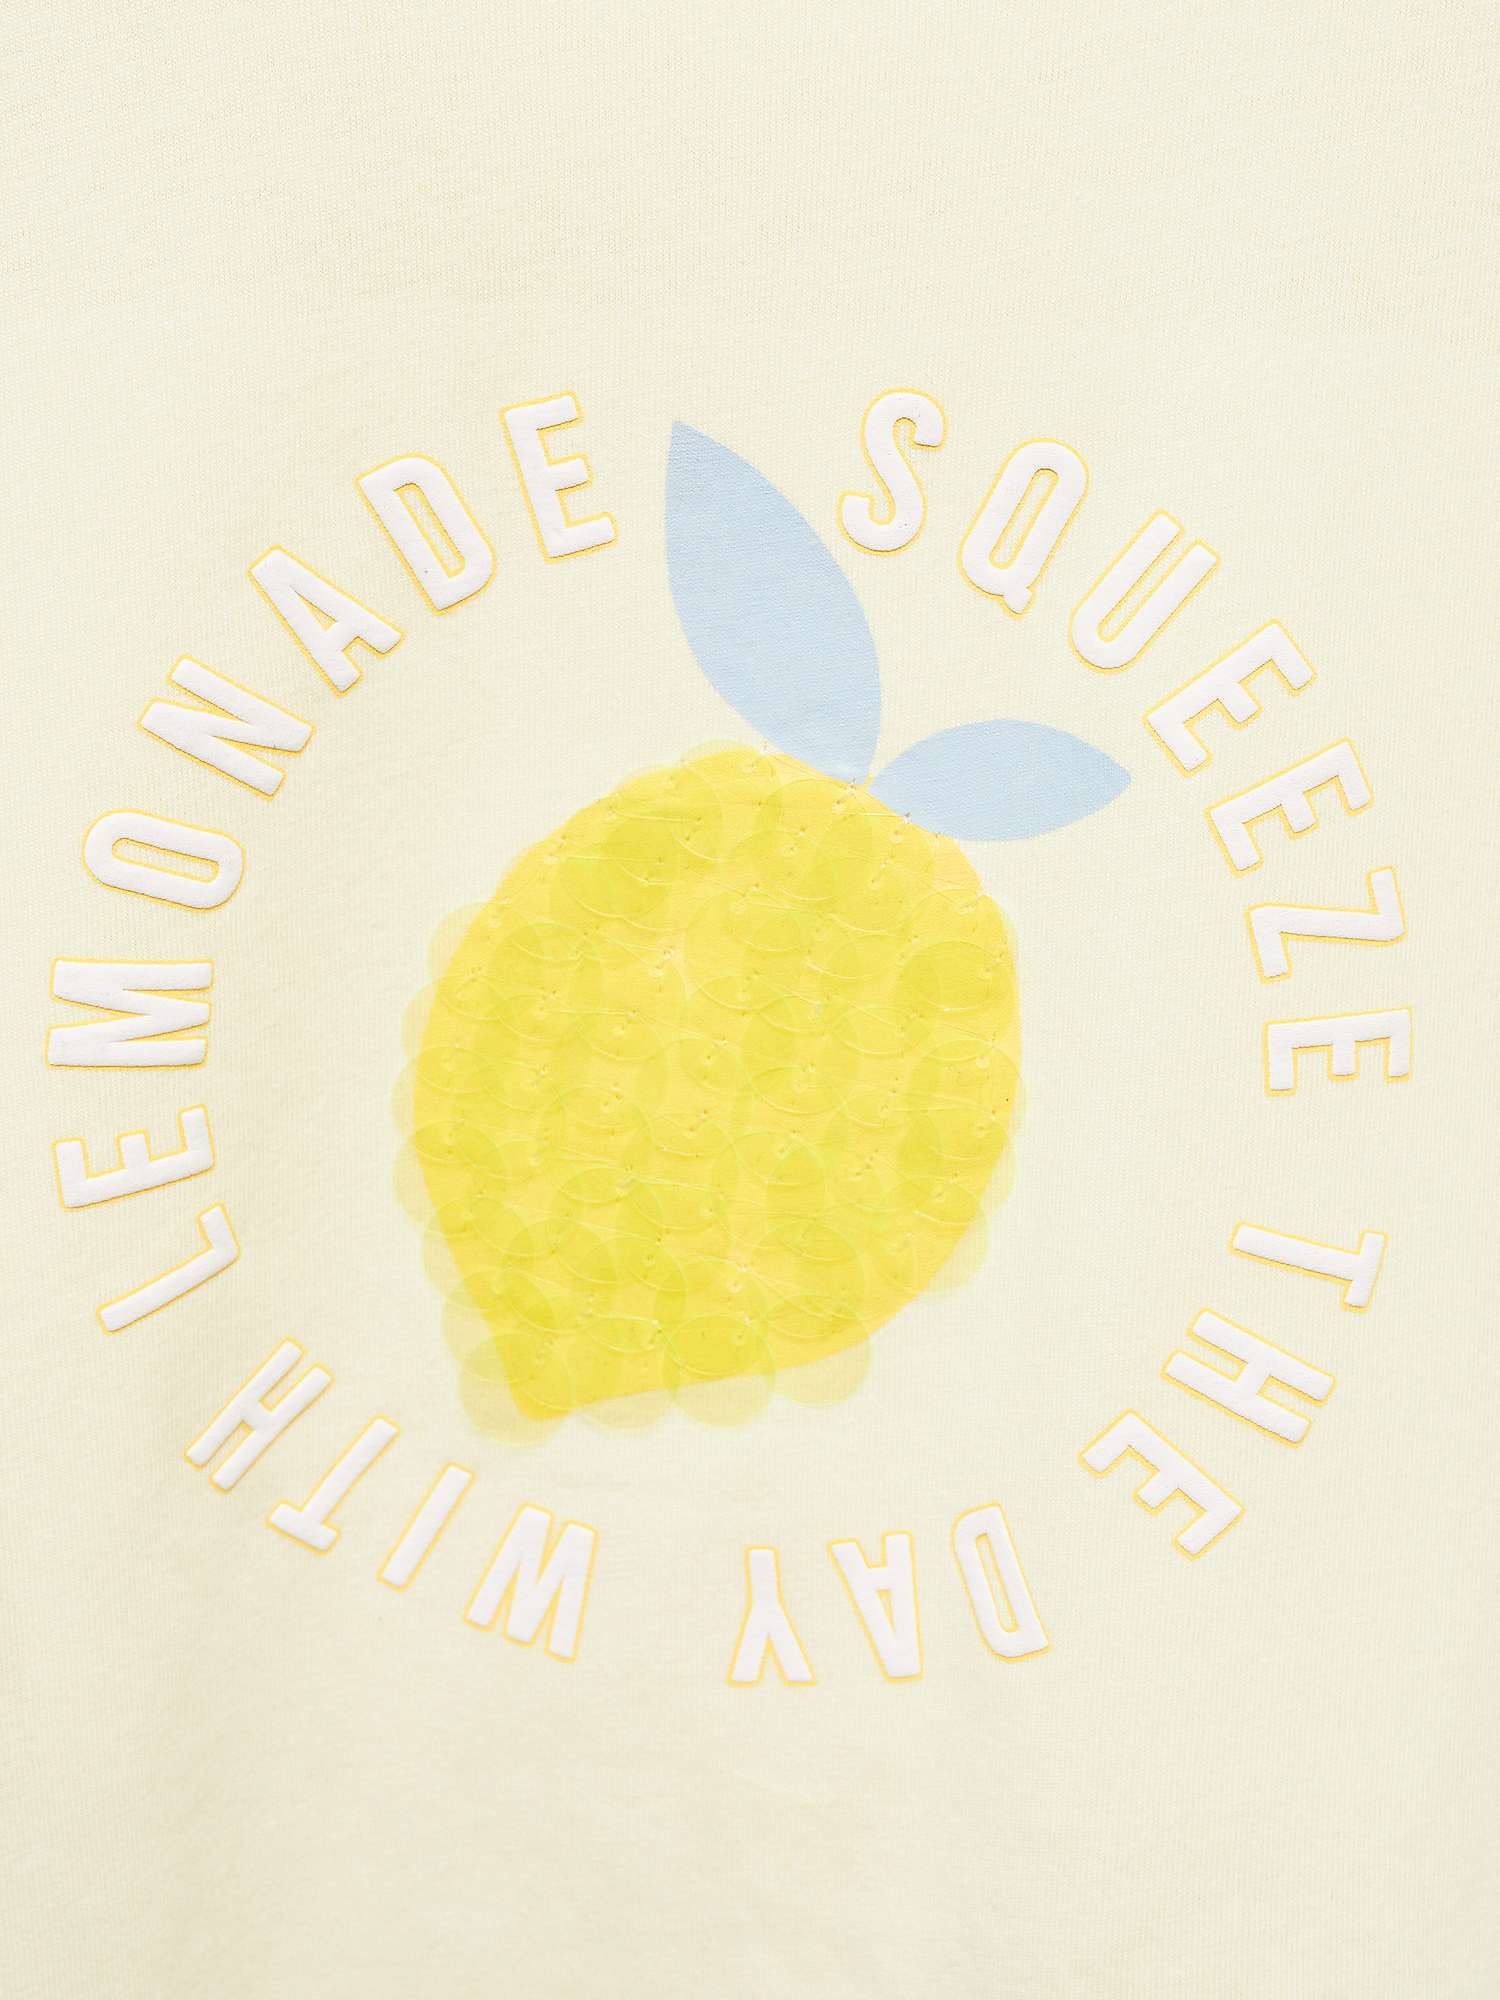 Buy Mango Kids' Sorbet Squeeze The Day T-Shirt, Yellow Online at johnlewis.com